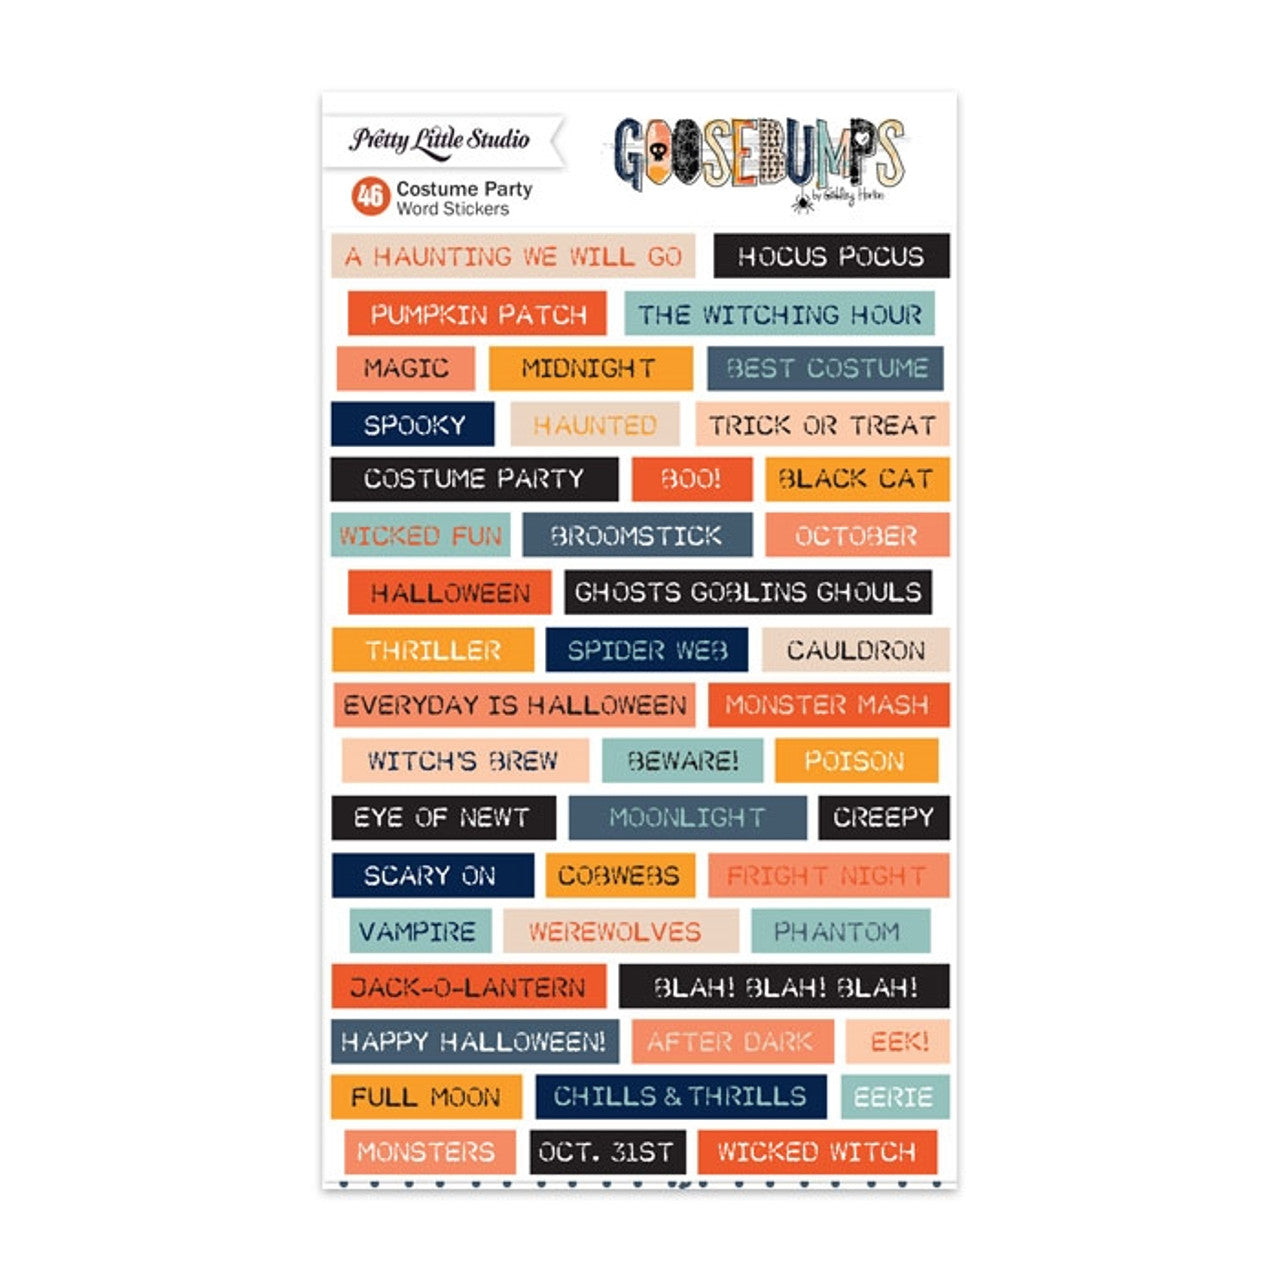 Goosebumps . Costume Party Word Stickers